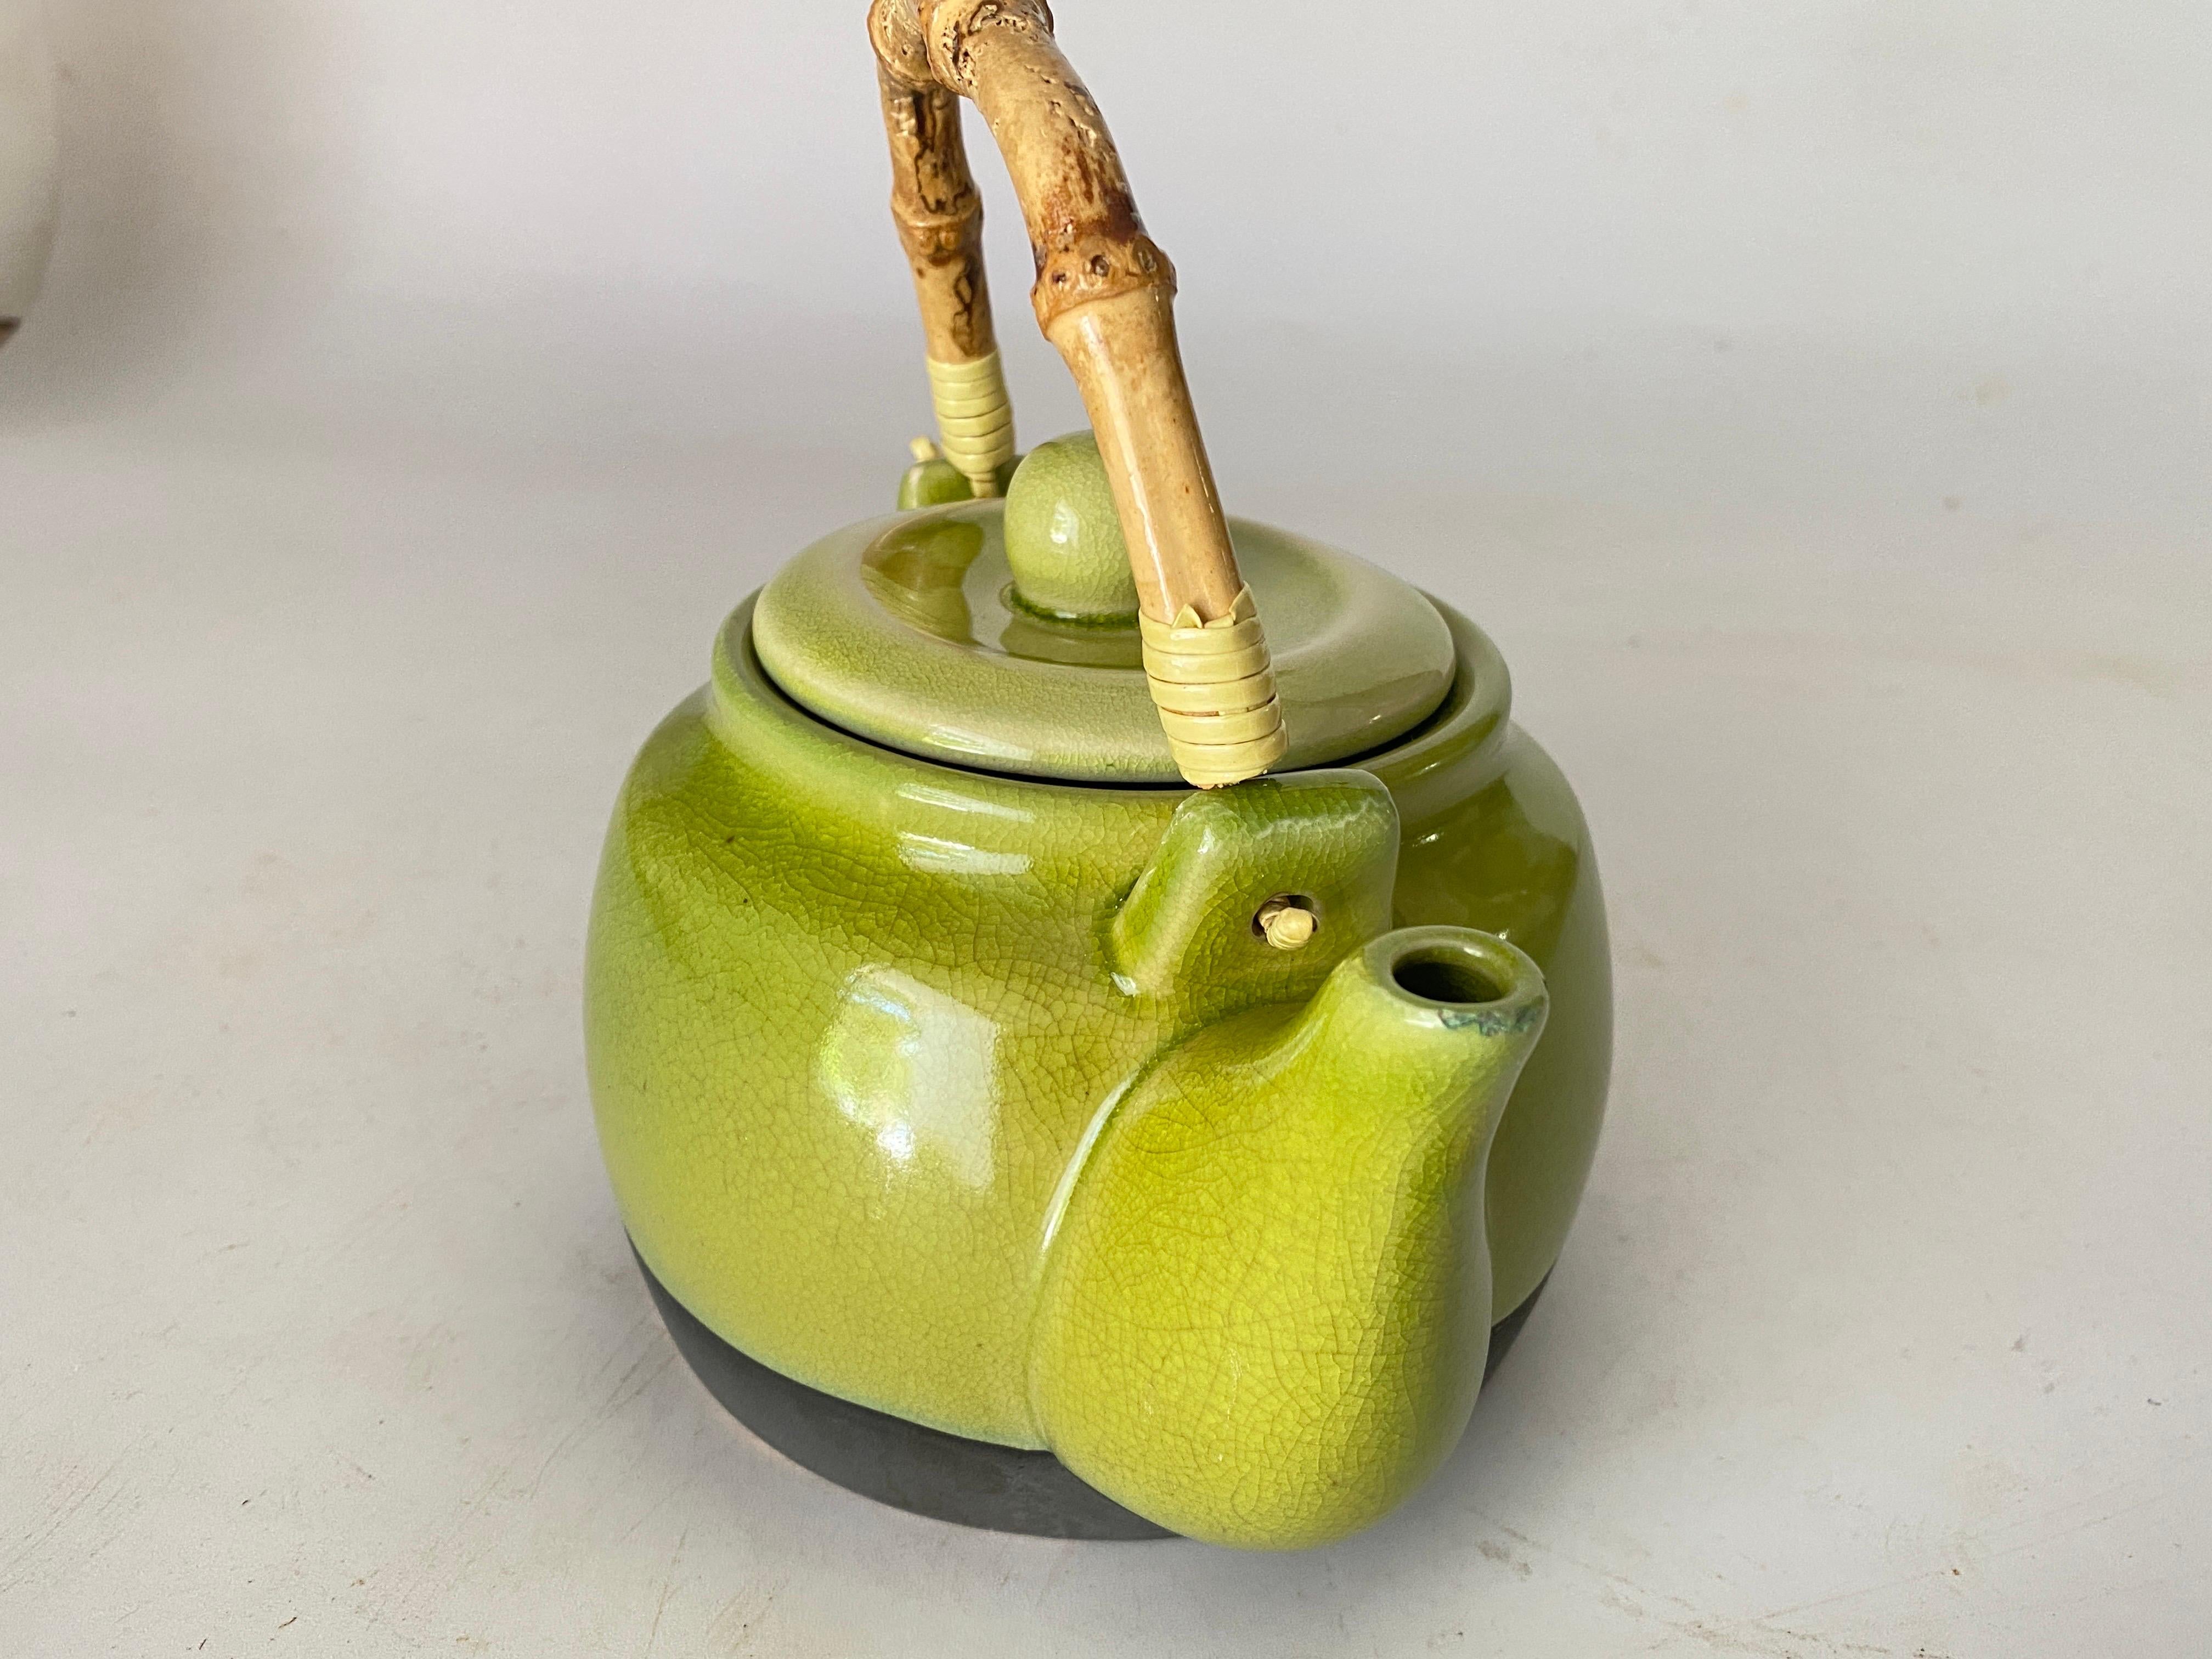 Crakeled Ceramic Tea Pot Attributed Green Color 20 th Century France In Good Condition For Sale In Auribeau sur Siagne, FR